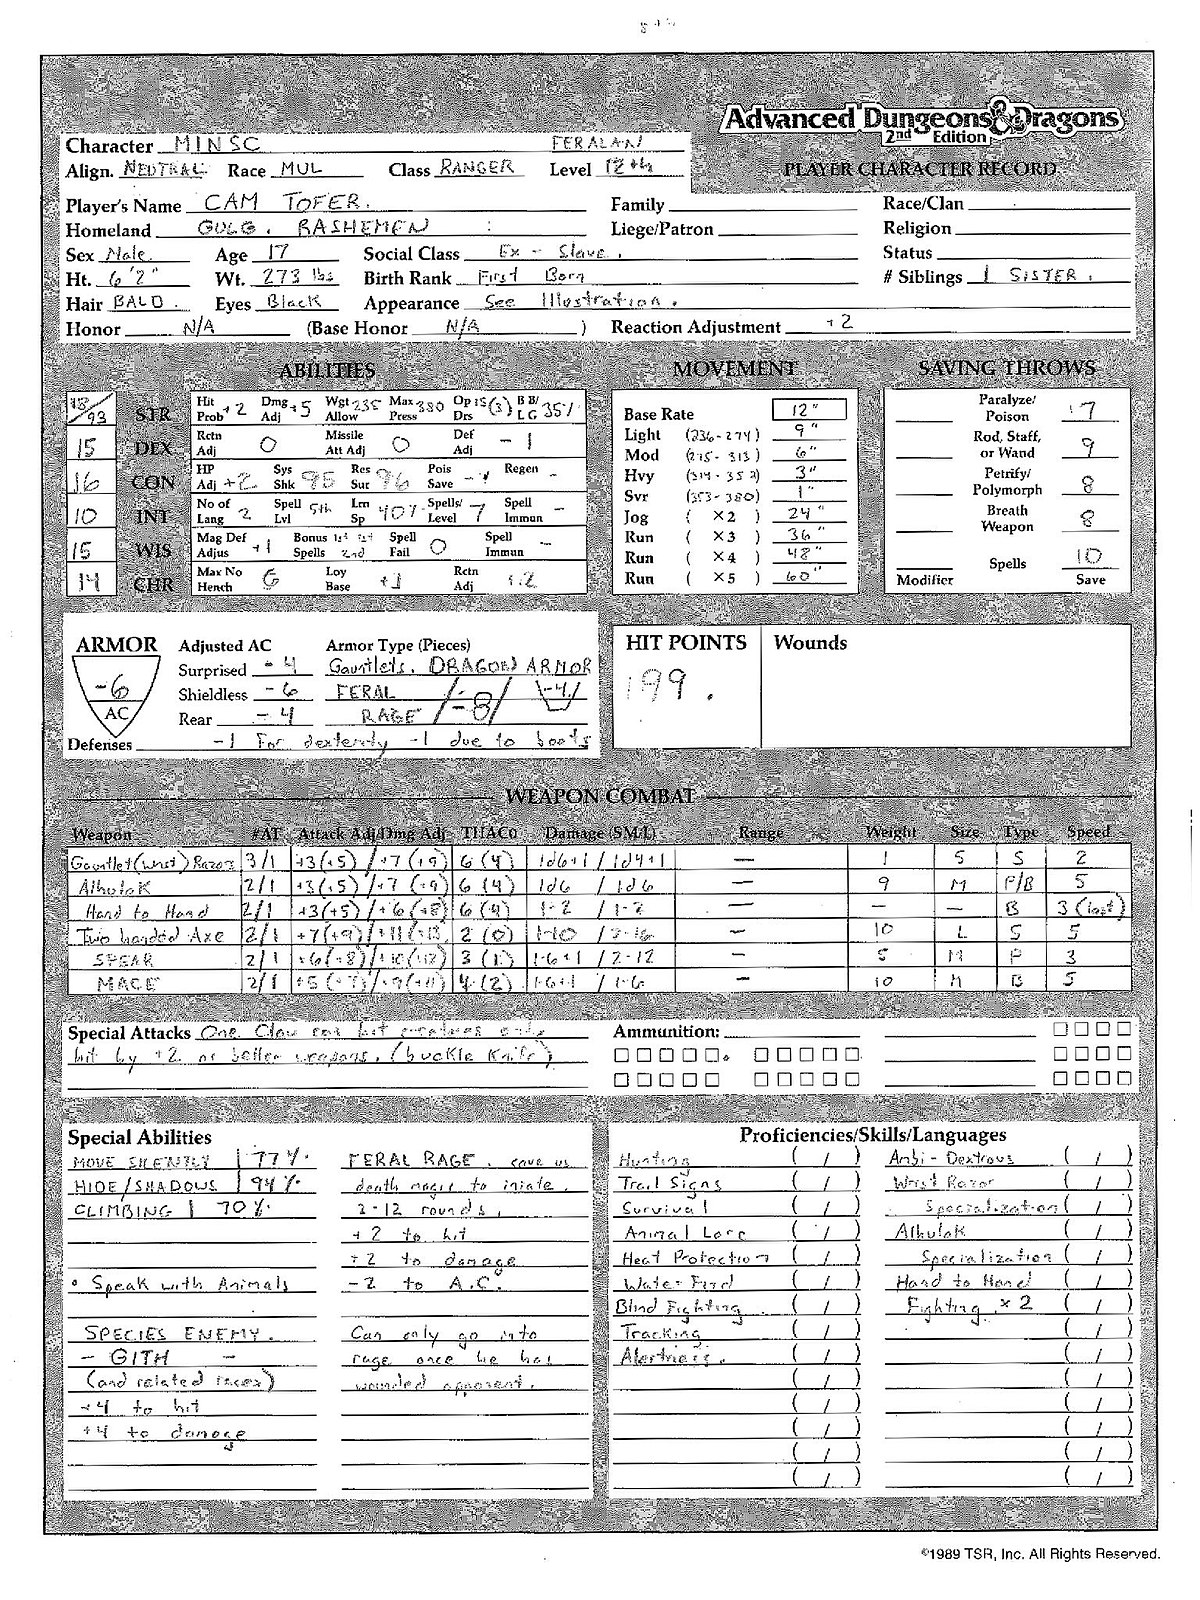 Minsc_Character_Sheet_from_Cameron_Tofer_pen&paper_game.jpg